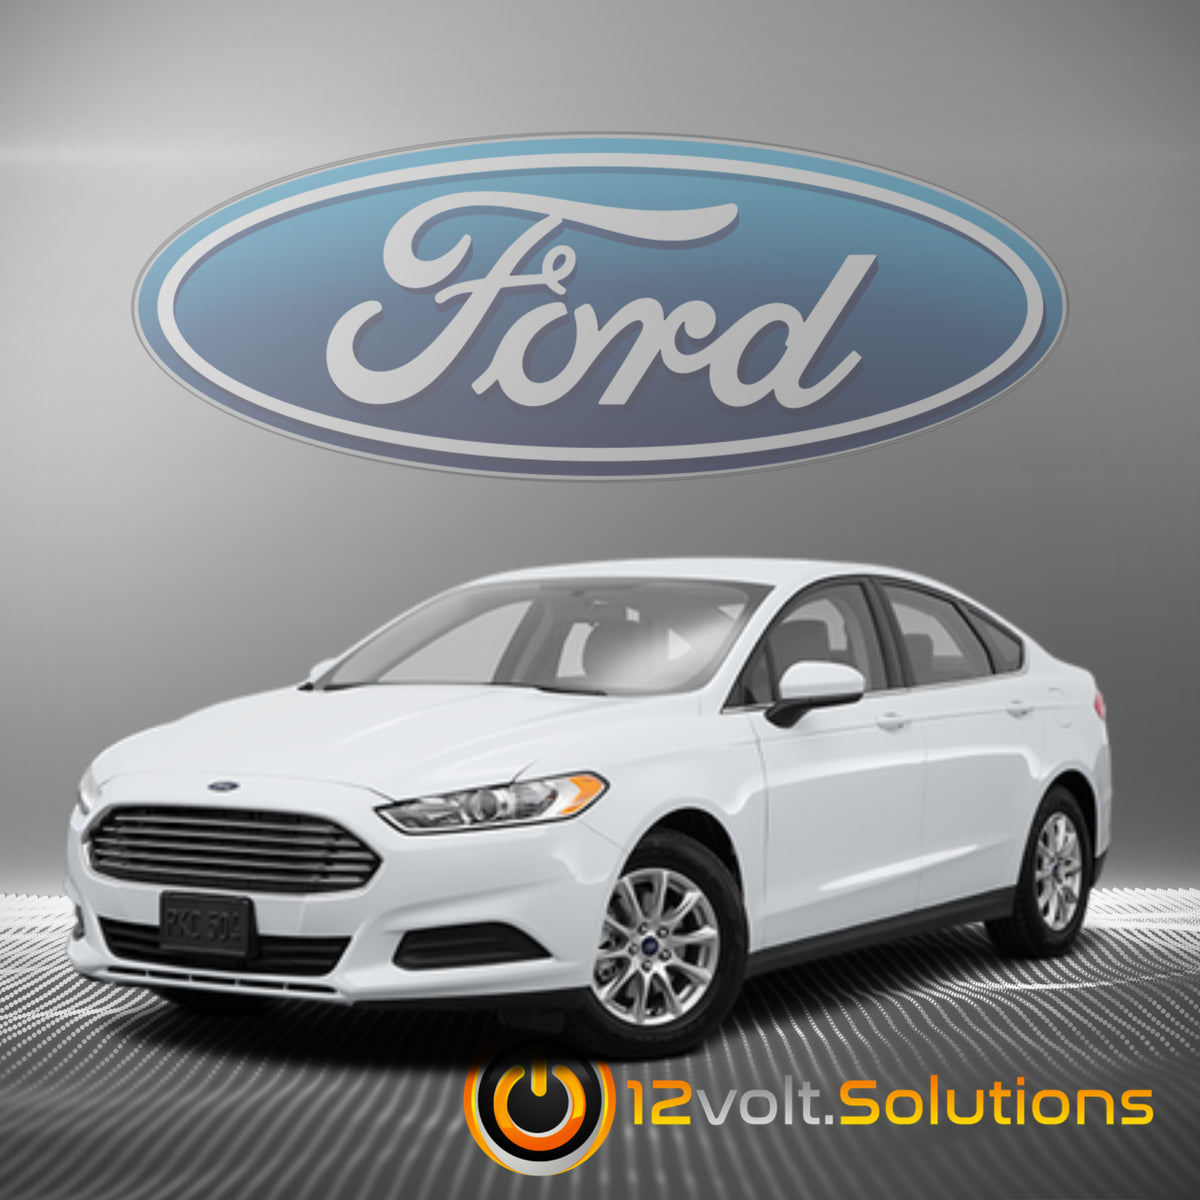 2014-2016 Ford Fusion Remote Start Plug & Play Kit-12Volt.Solutions